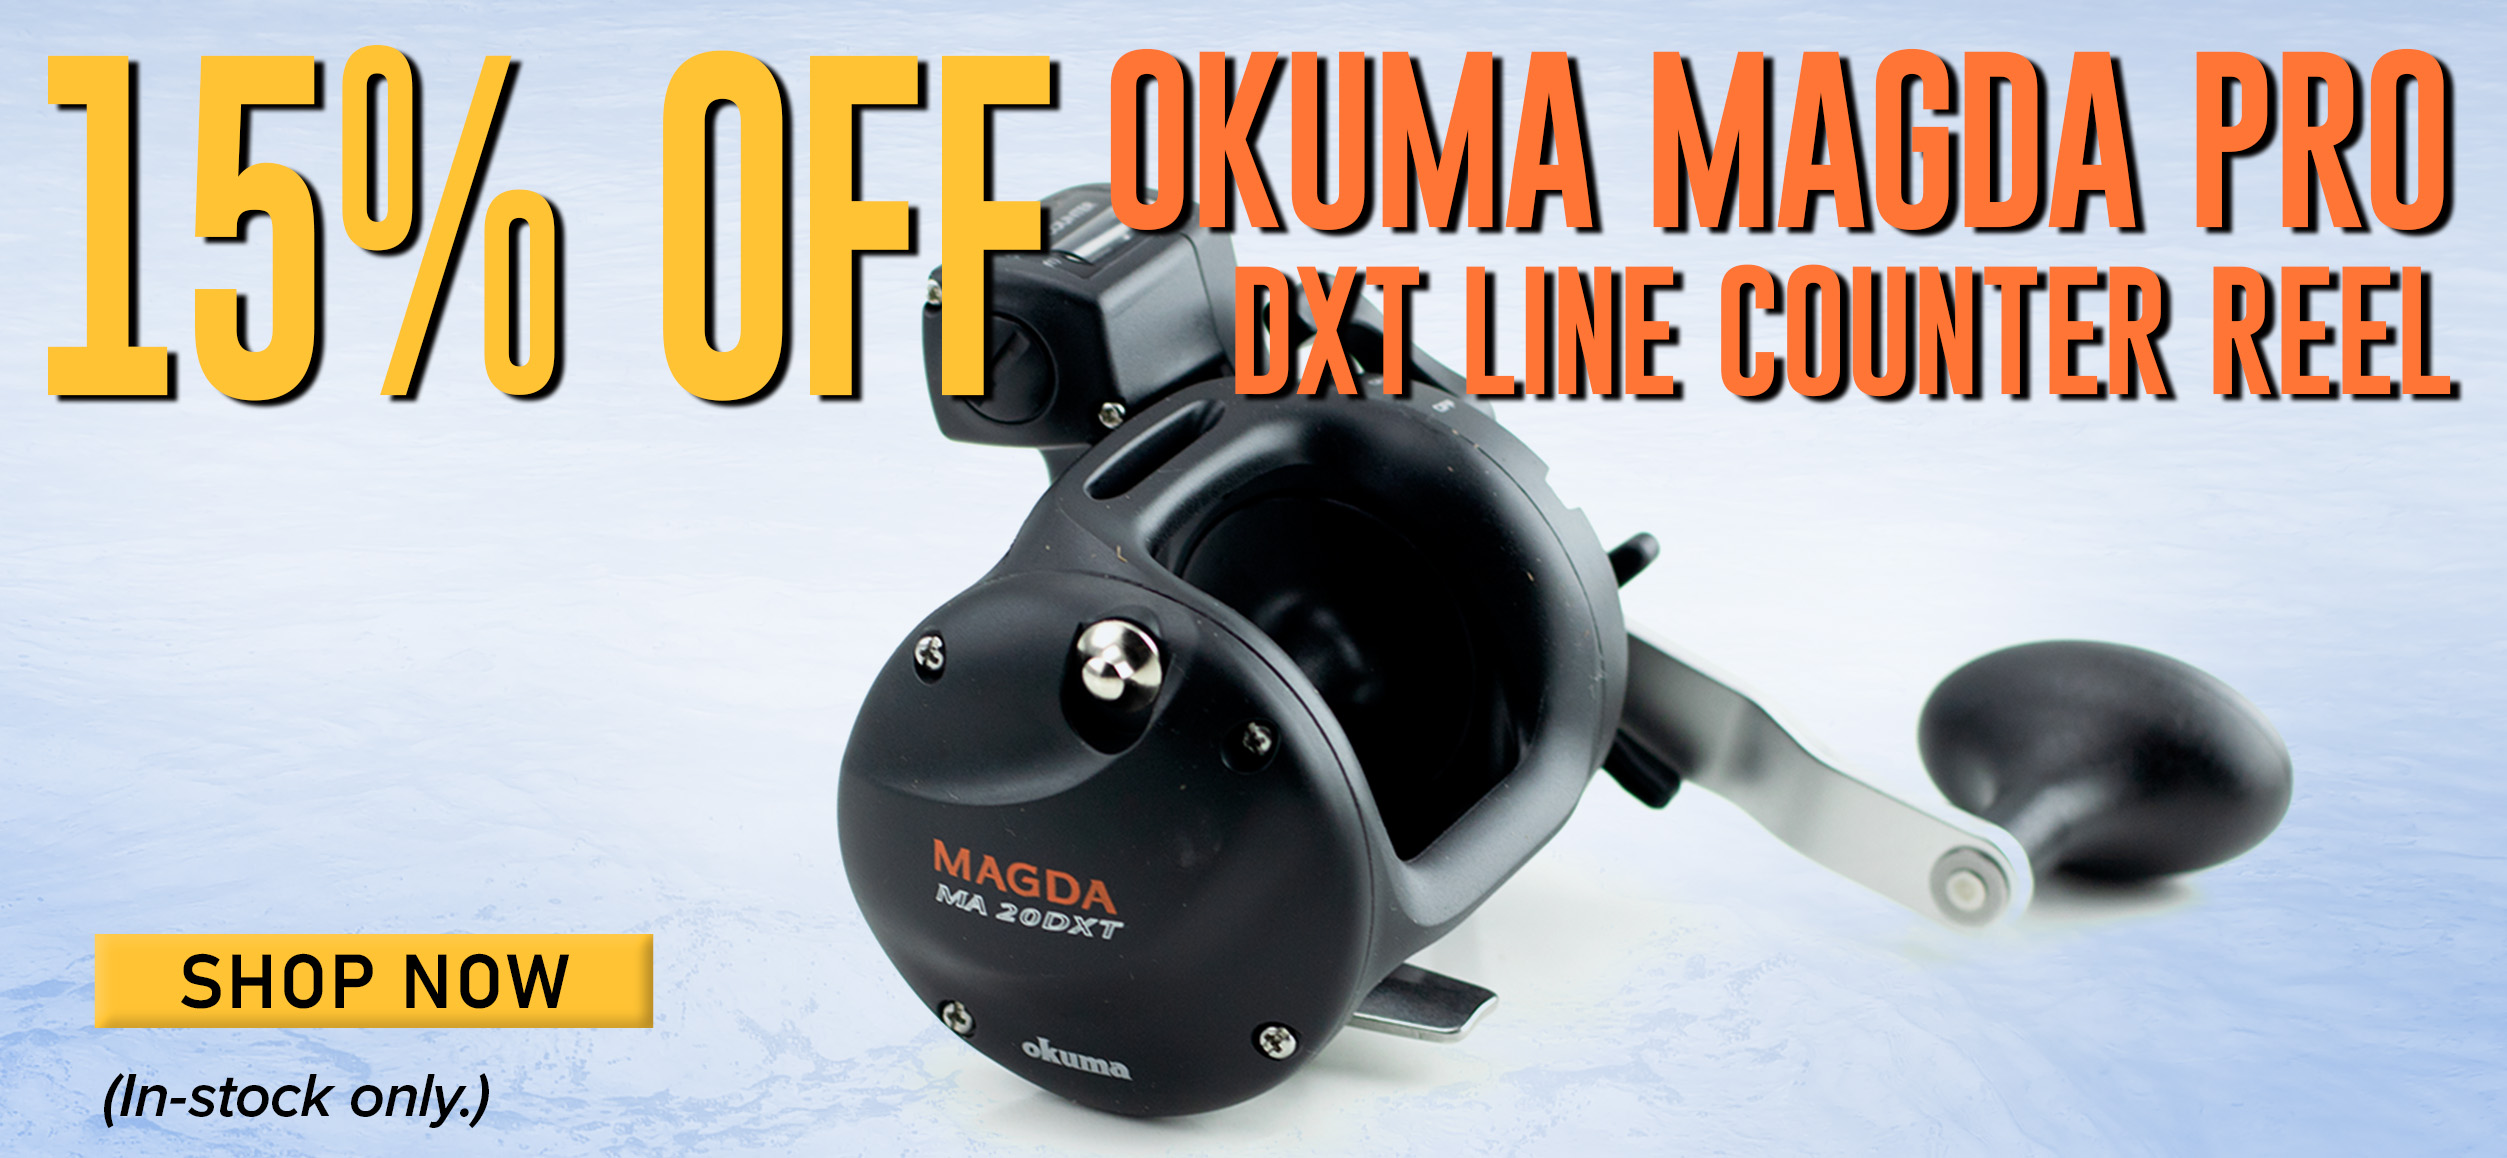 15% Off Okuma Magda Pro DXT Line Counter Reel Shop Now (In-stock only.)